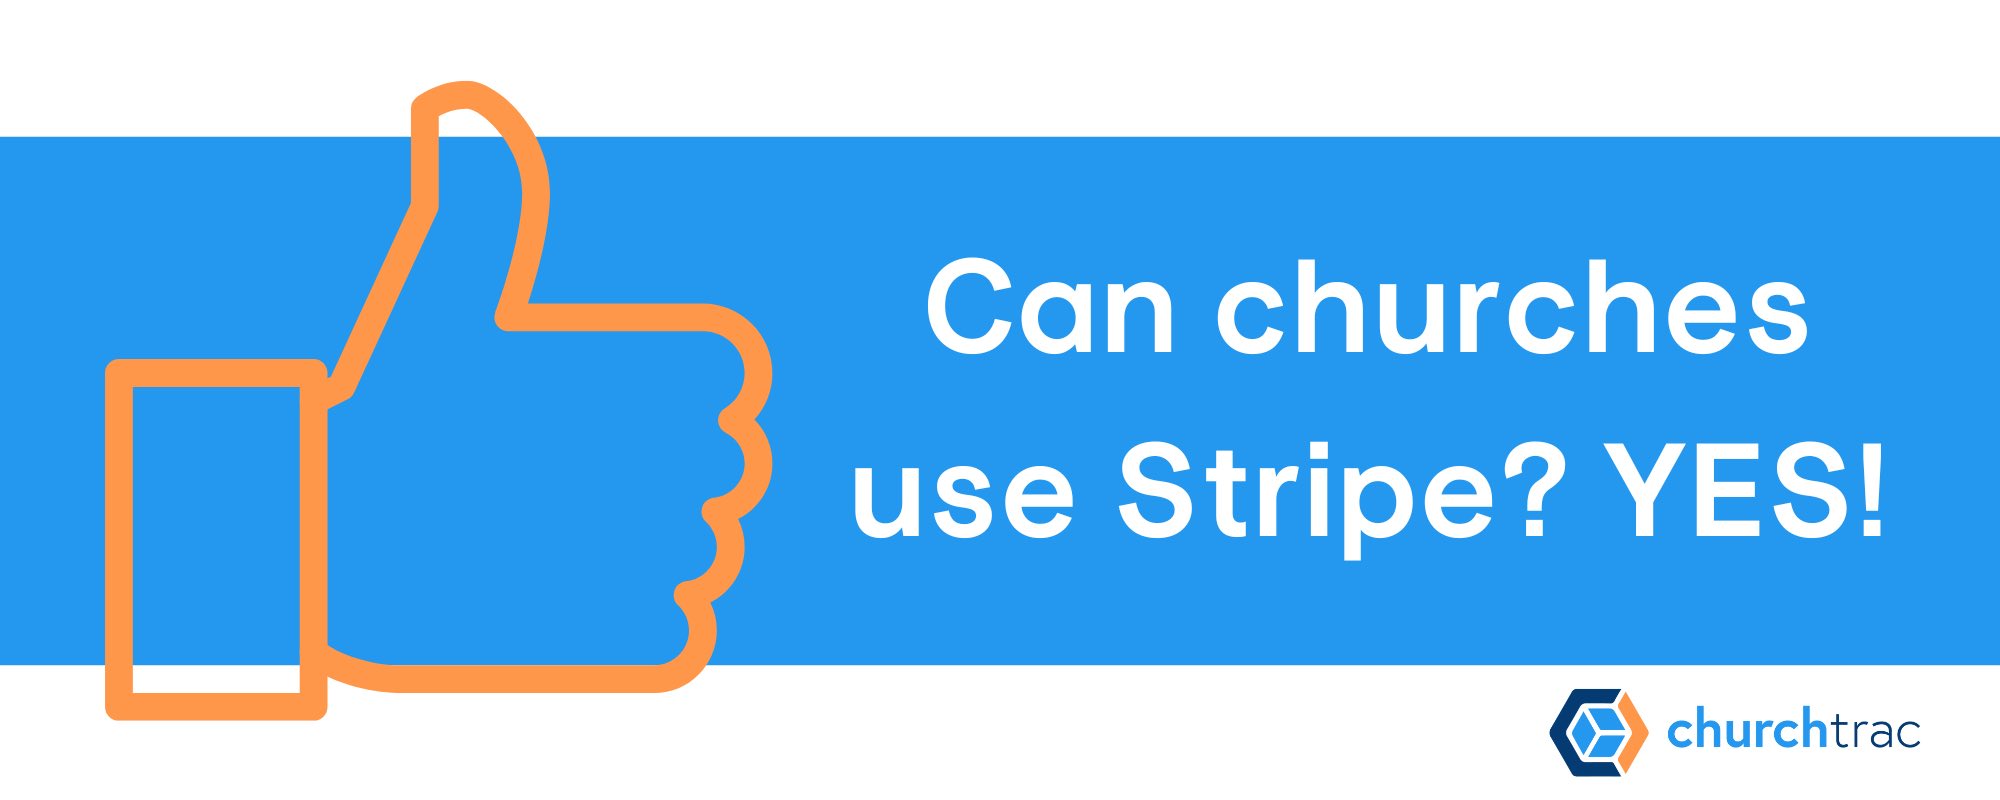 Churches can use Stripe for Donations